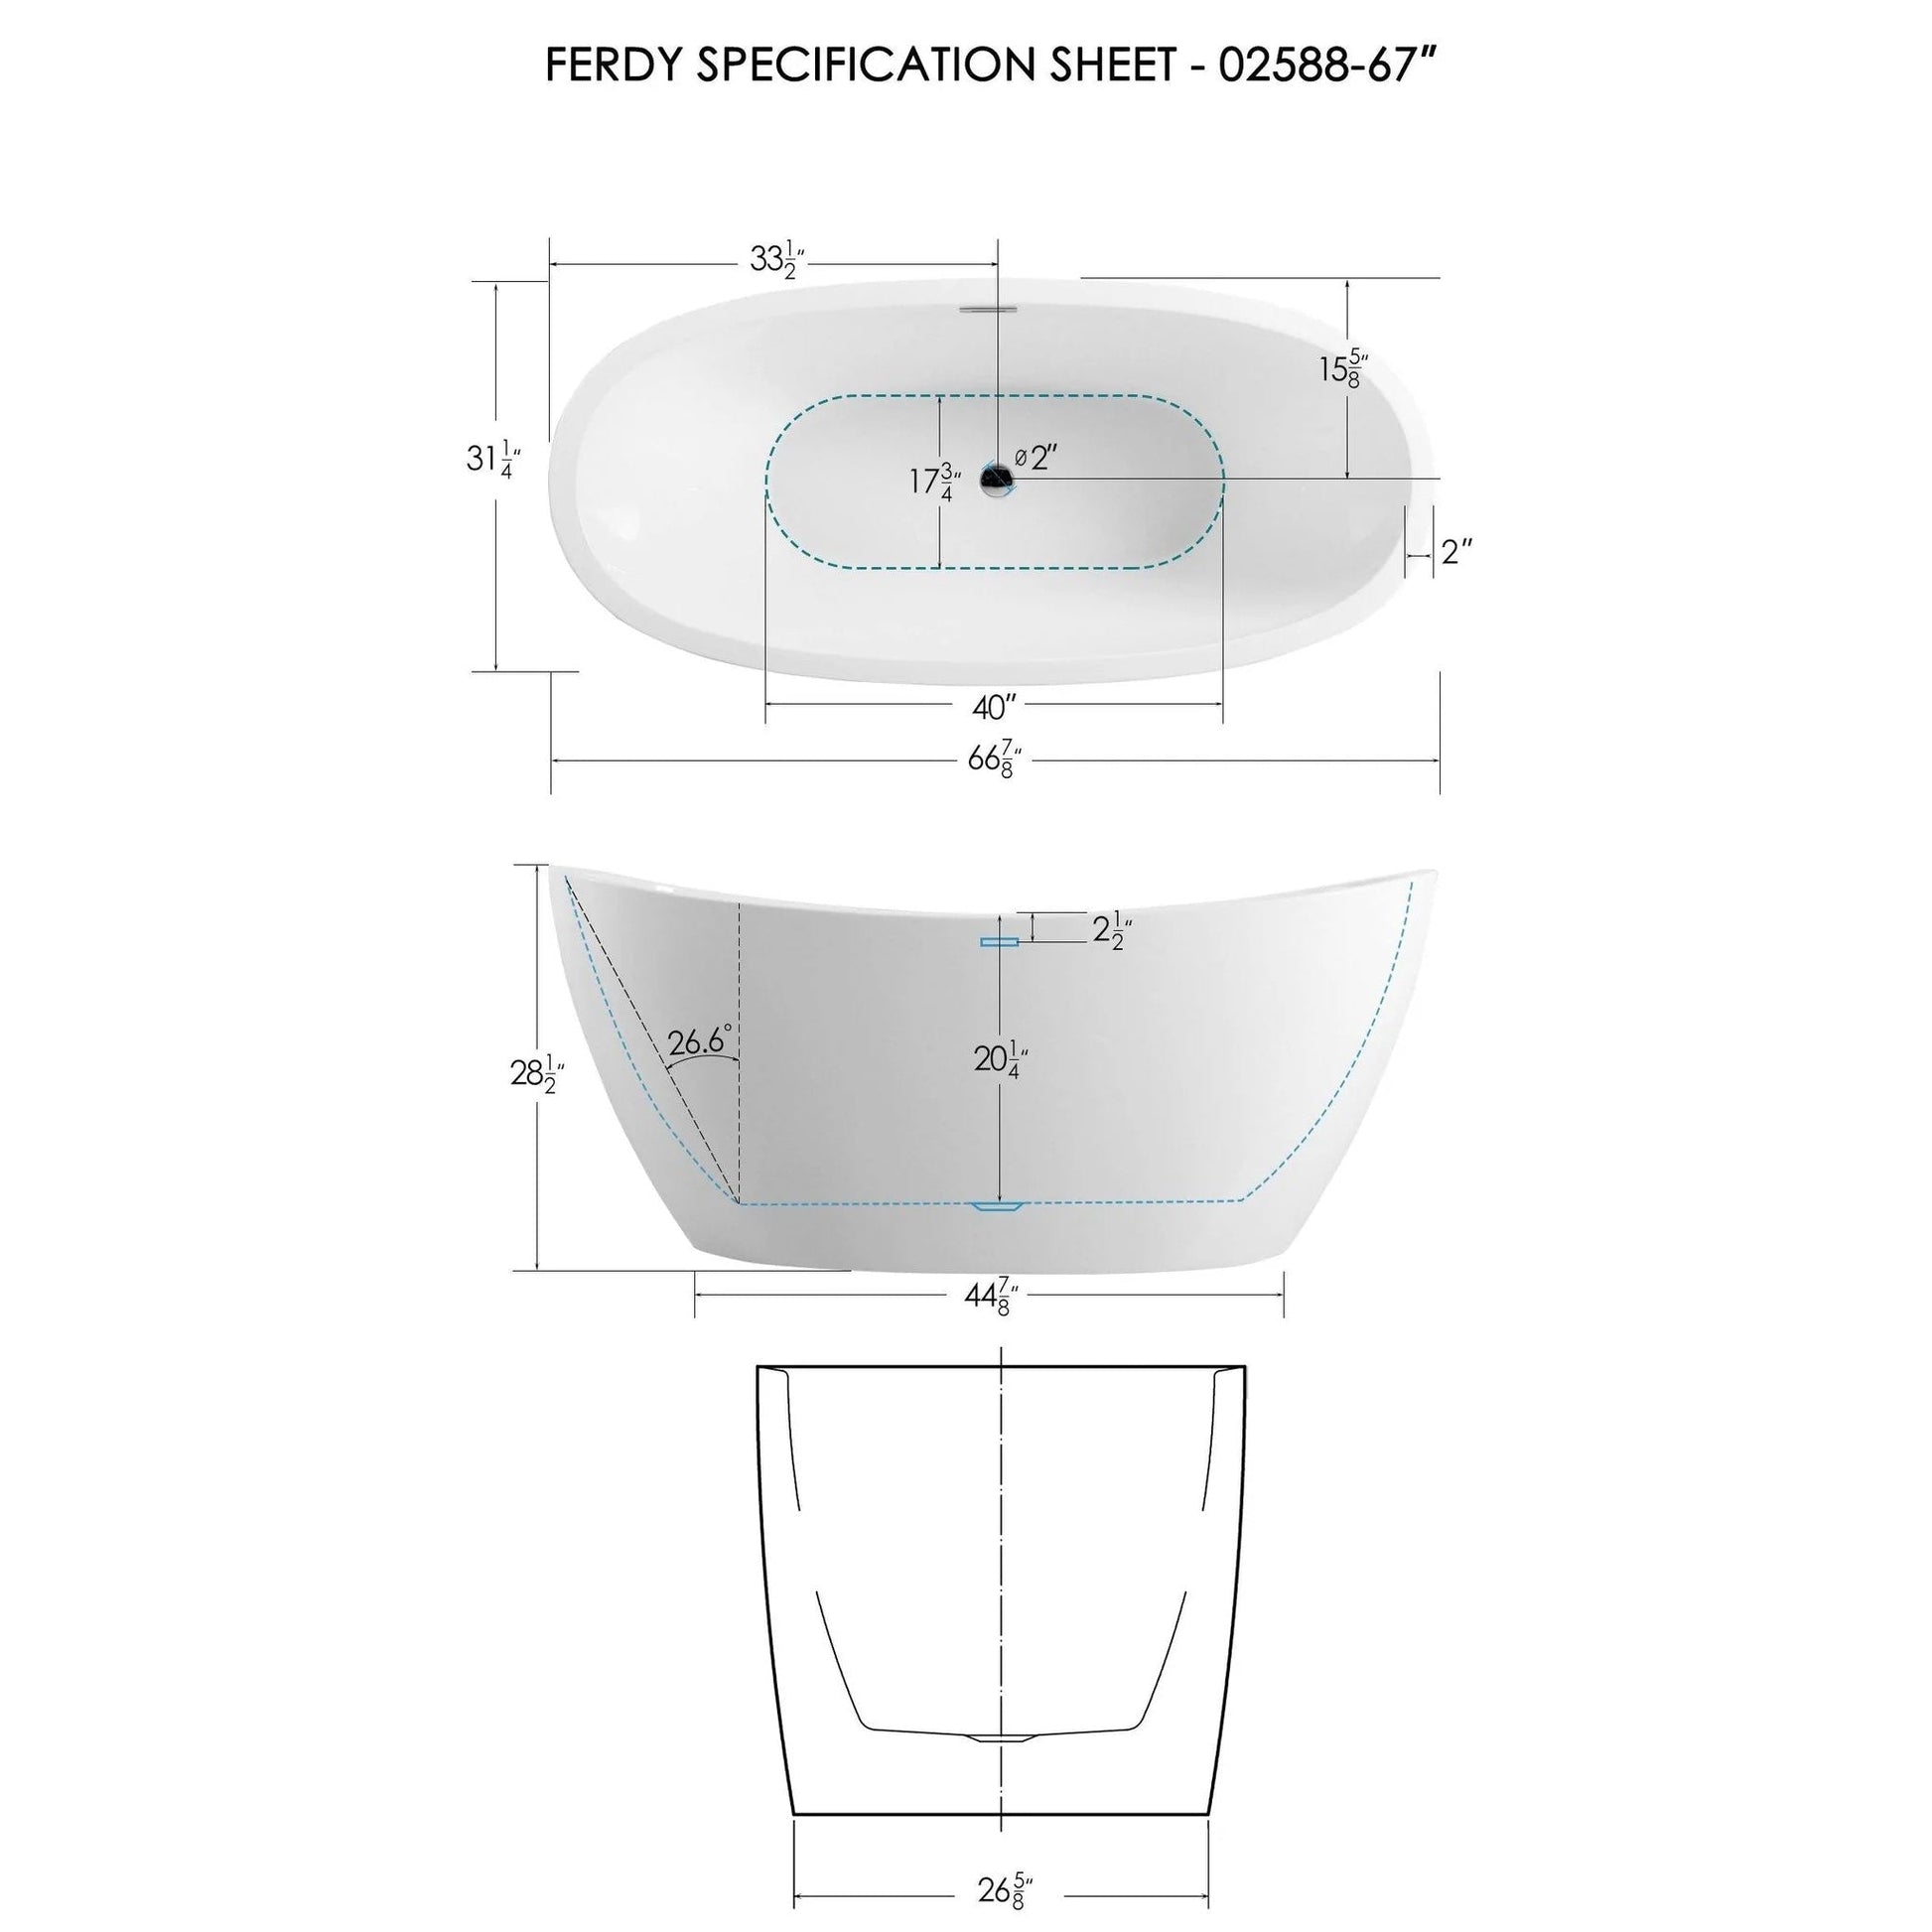 FerdY Naha 67" x 31" Oval Glossy White Acrylic Freestanding Double Slipper Soaking Bathtub With Brushed Nickel Drain and Overflow